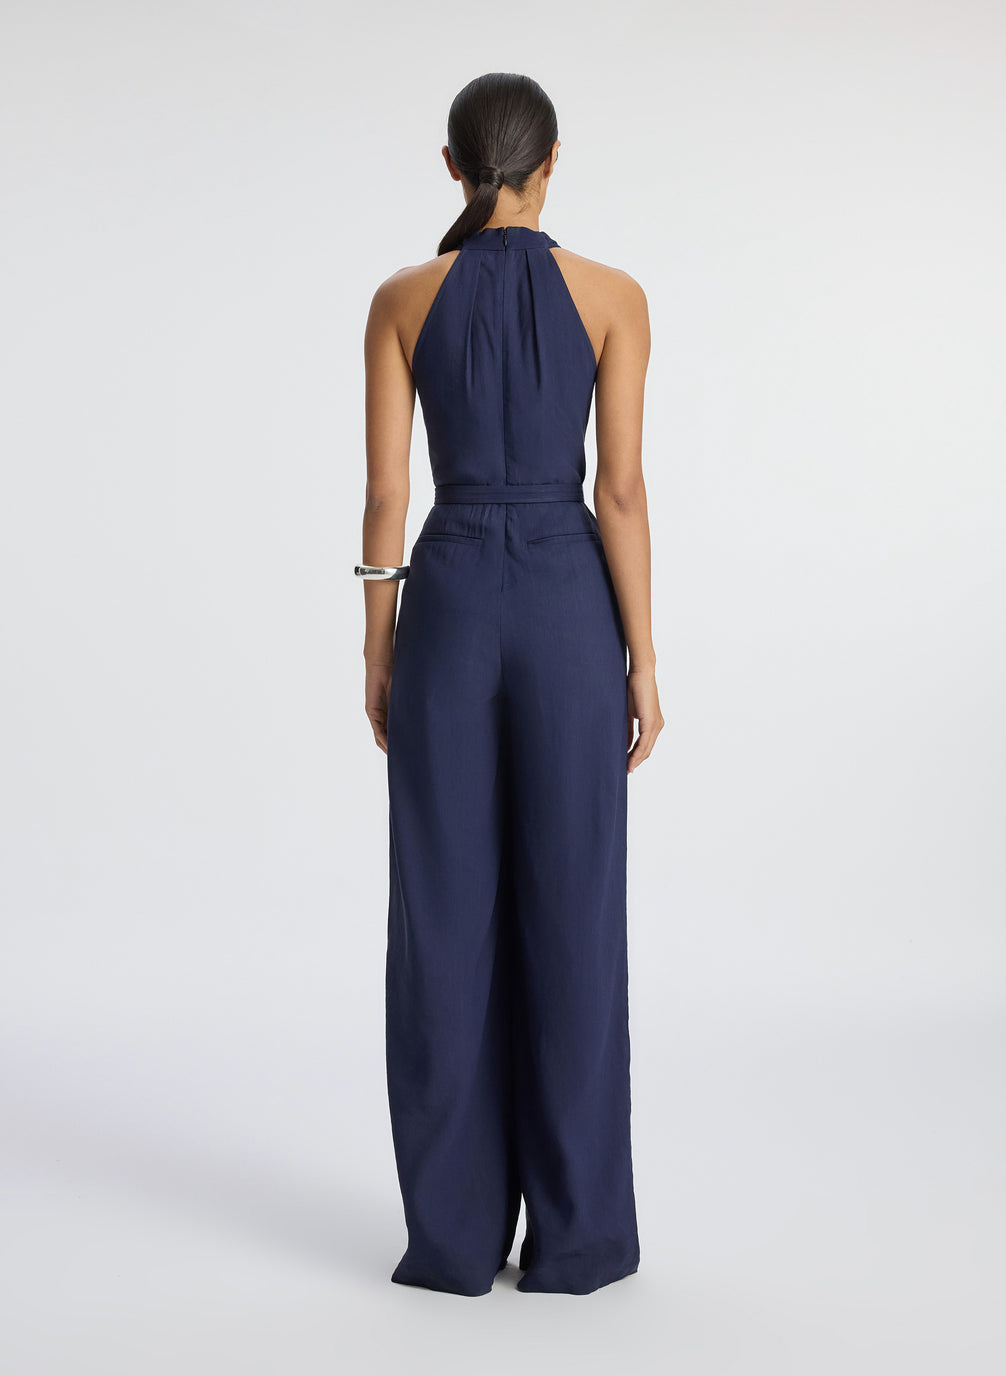 back view of woman wearing navy blue sleeveless jumpsuit